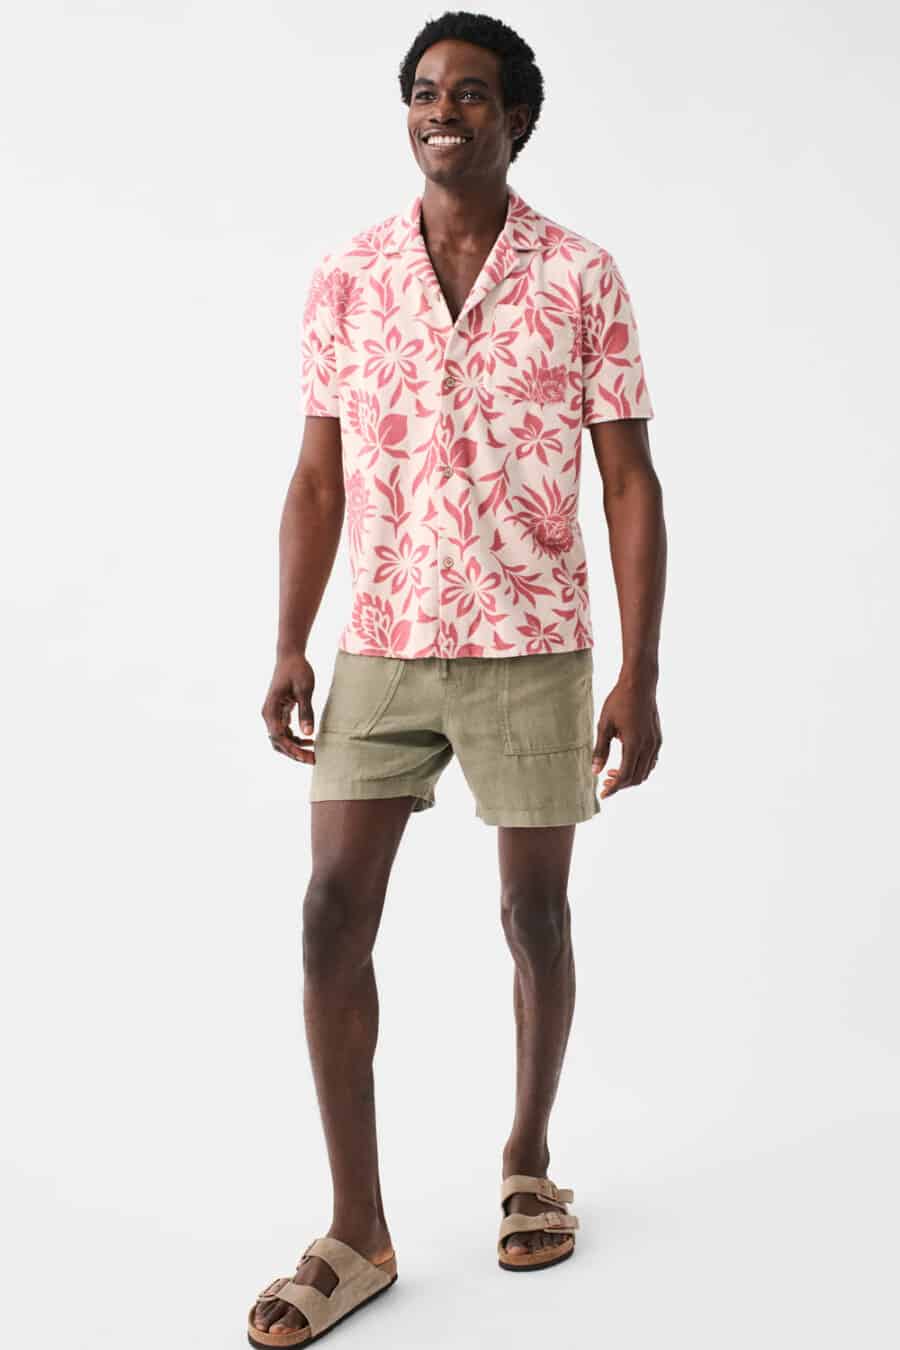 Men's light green short shorts, pink/white floral shirt and taupe slider sandals outfit